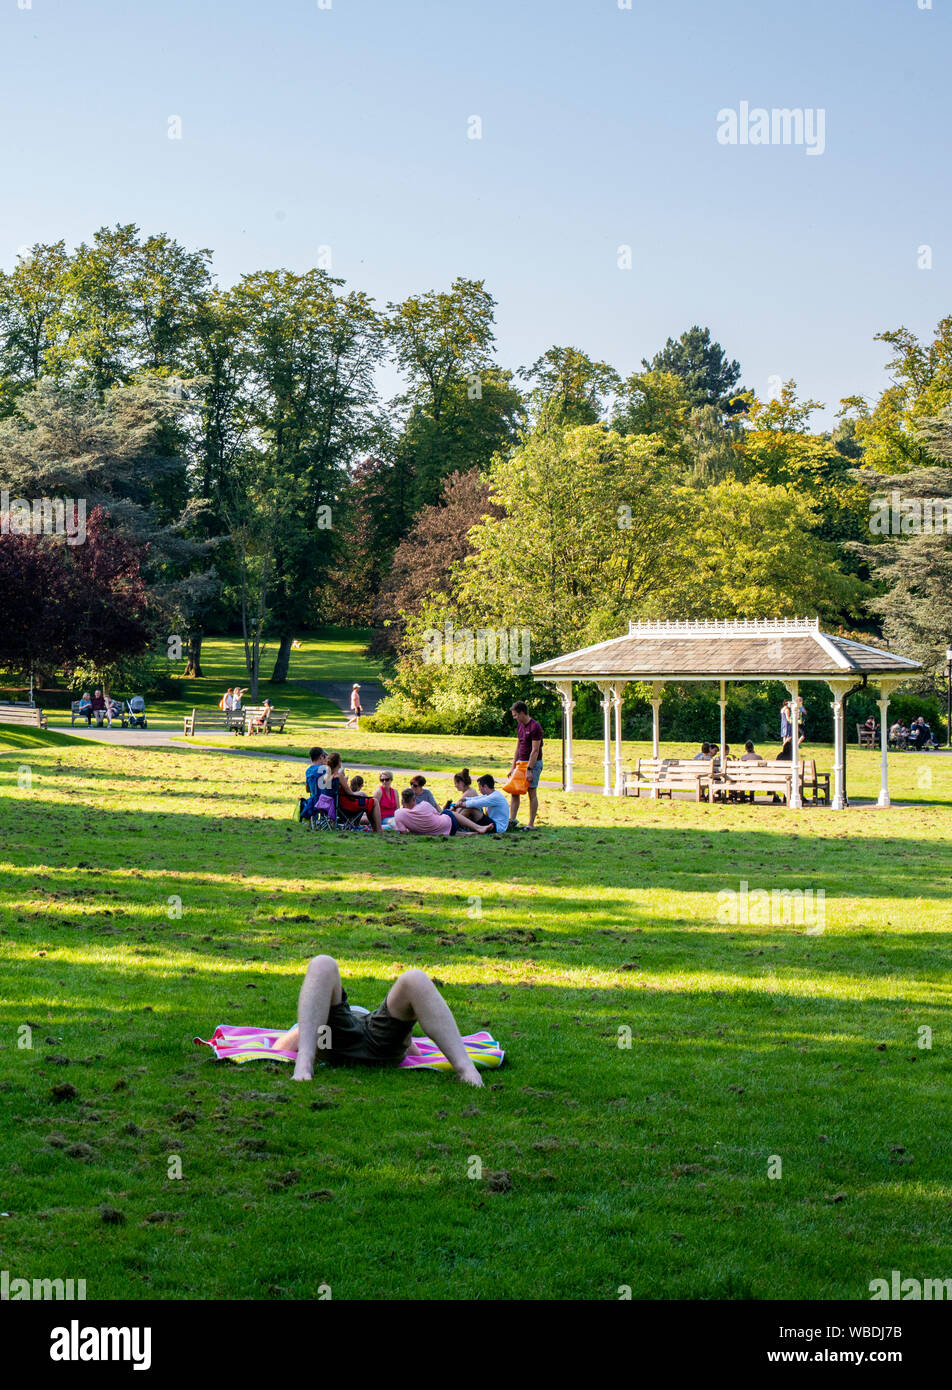 People relaxing on grass in park sur très chaud, Bank Holiday Monday, Valley Gardens, Harrogate, Royaume-Uni, le 26 août 2019 Banque D'Images